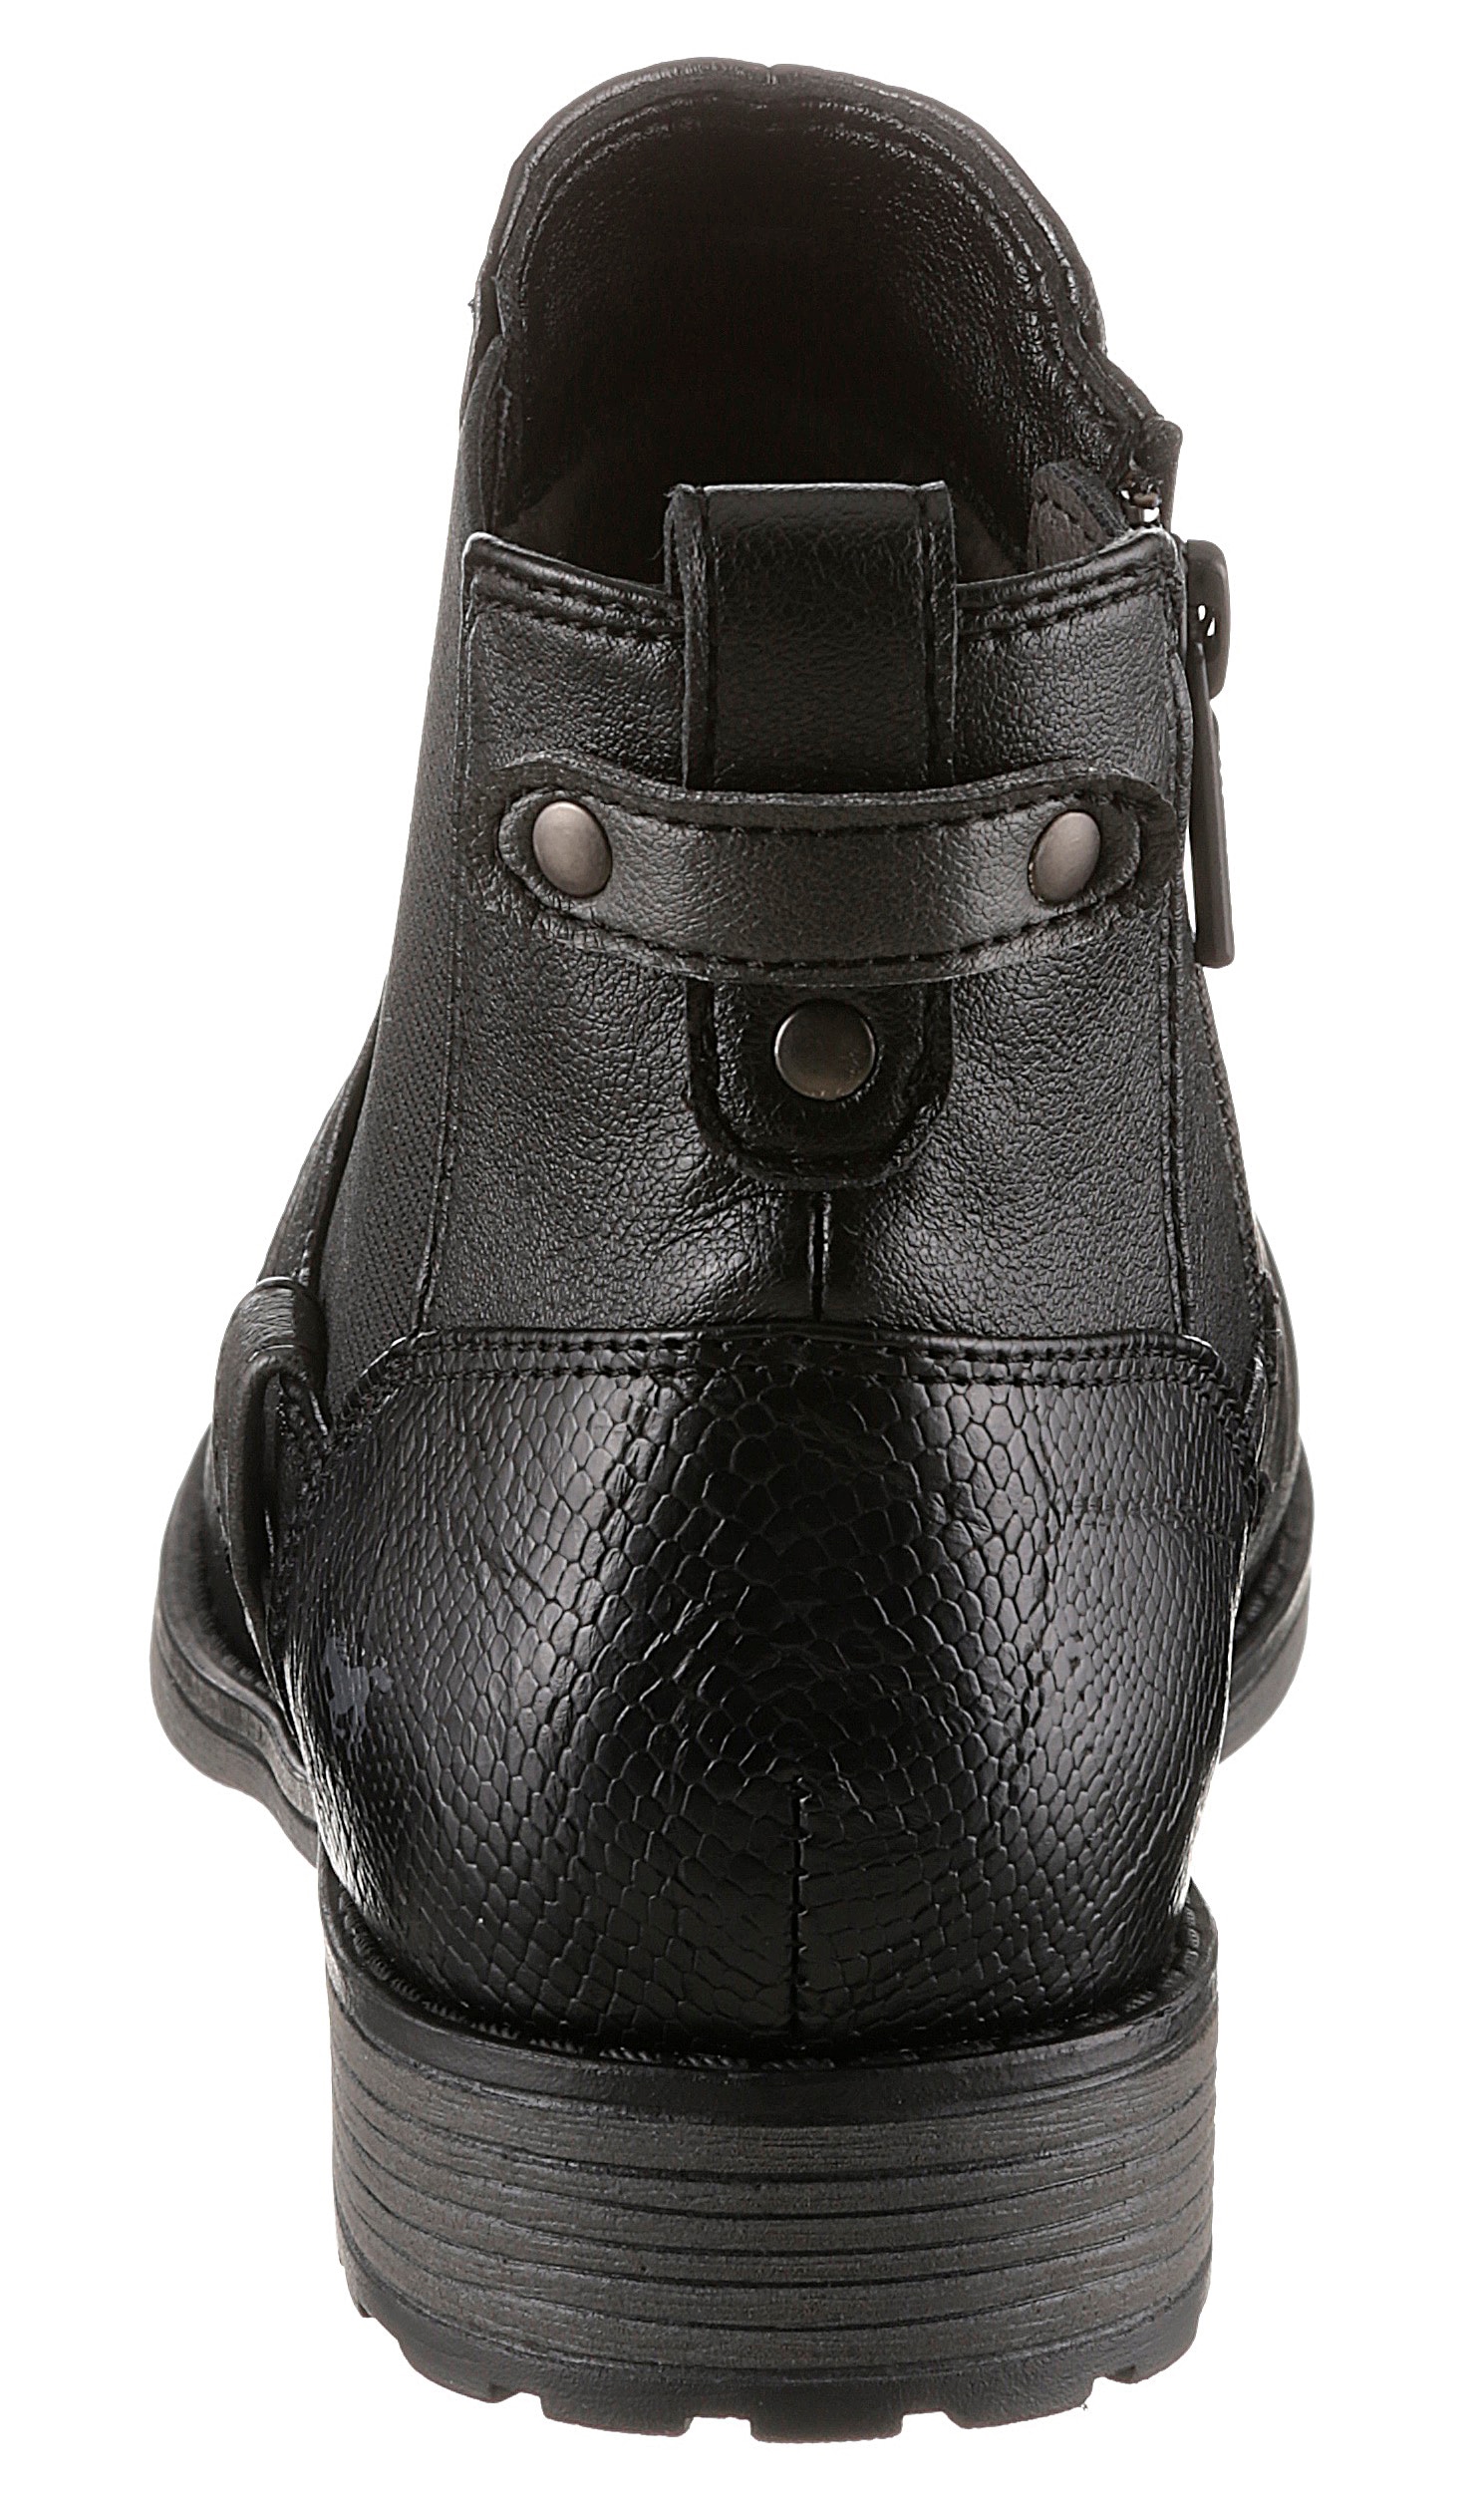 Mustang Shoes Chelseaboots, Schlupfstiefel, Stiefelette, Business Schuh in aktueller Used-Optik